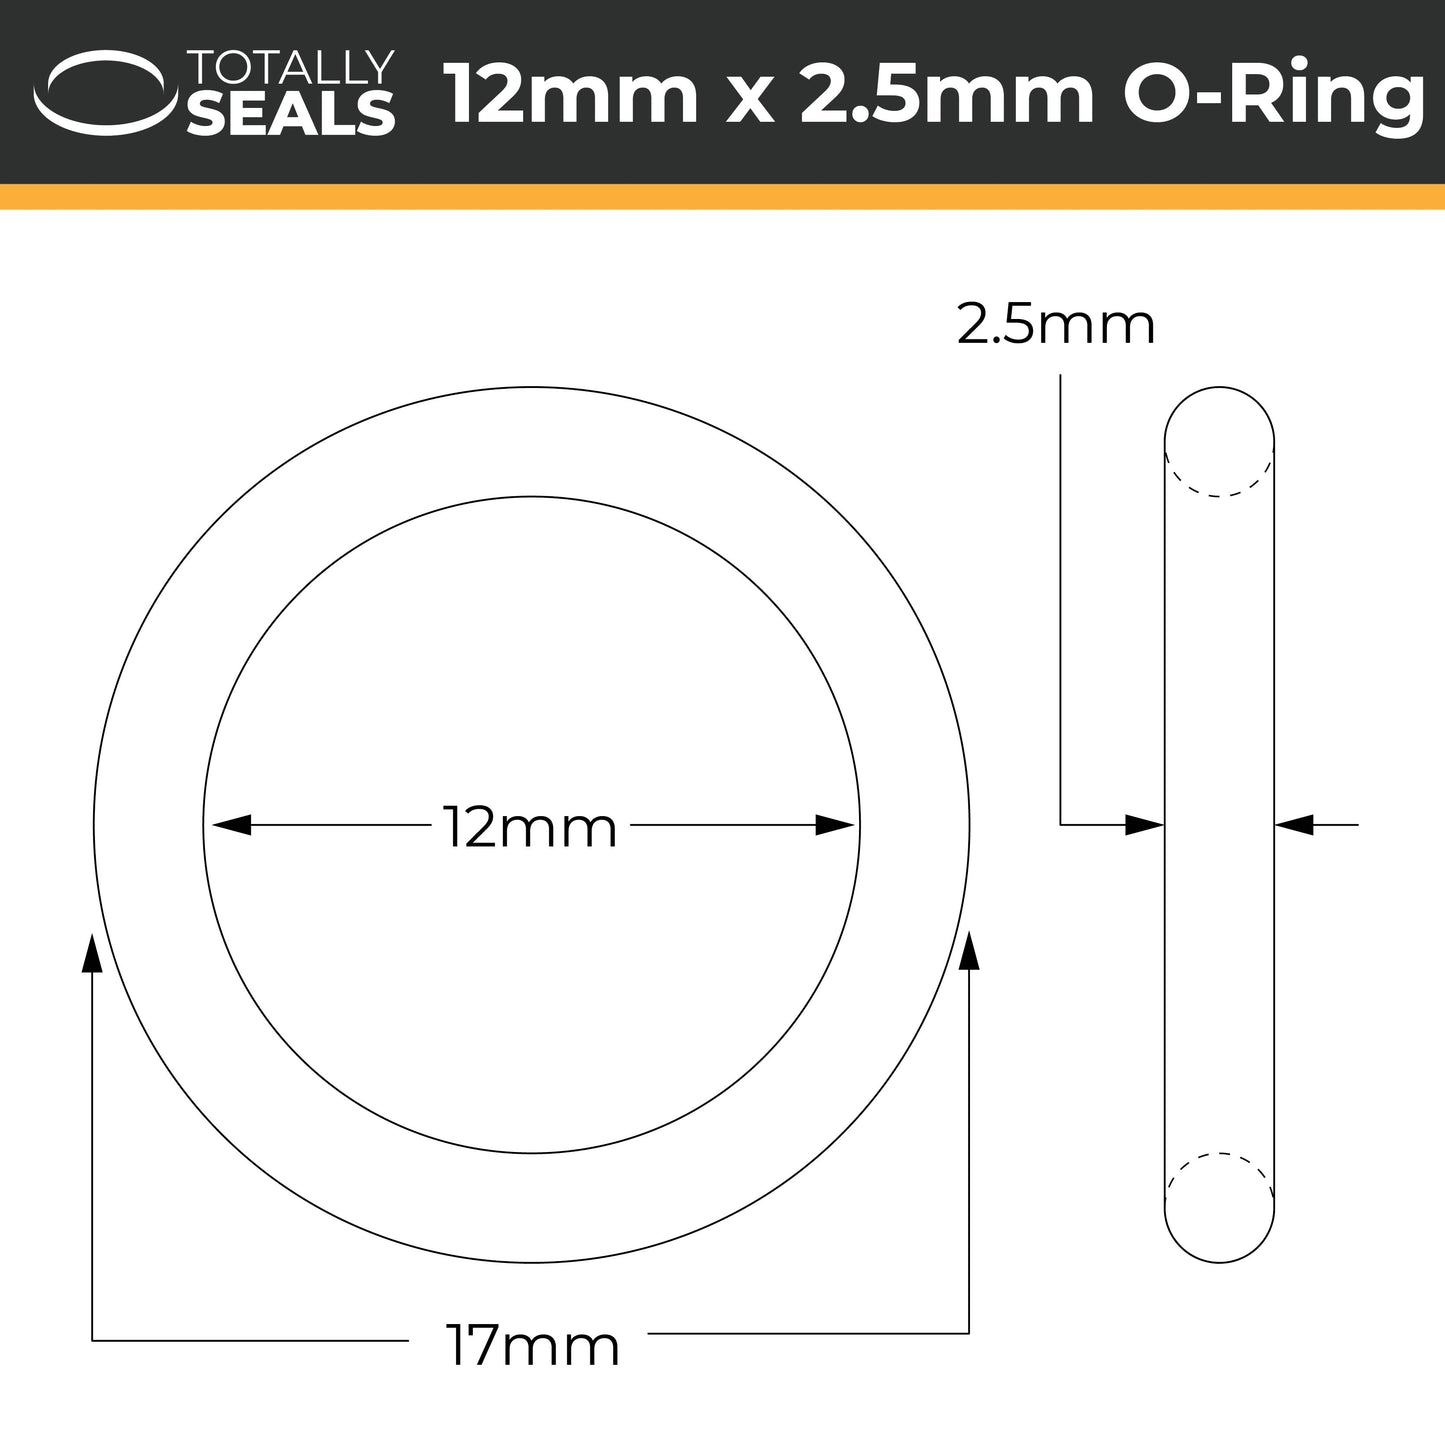 12mm x 2.5mm (17mm OD) Silicone O-Rings - Totally Seals®